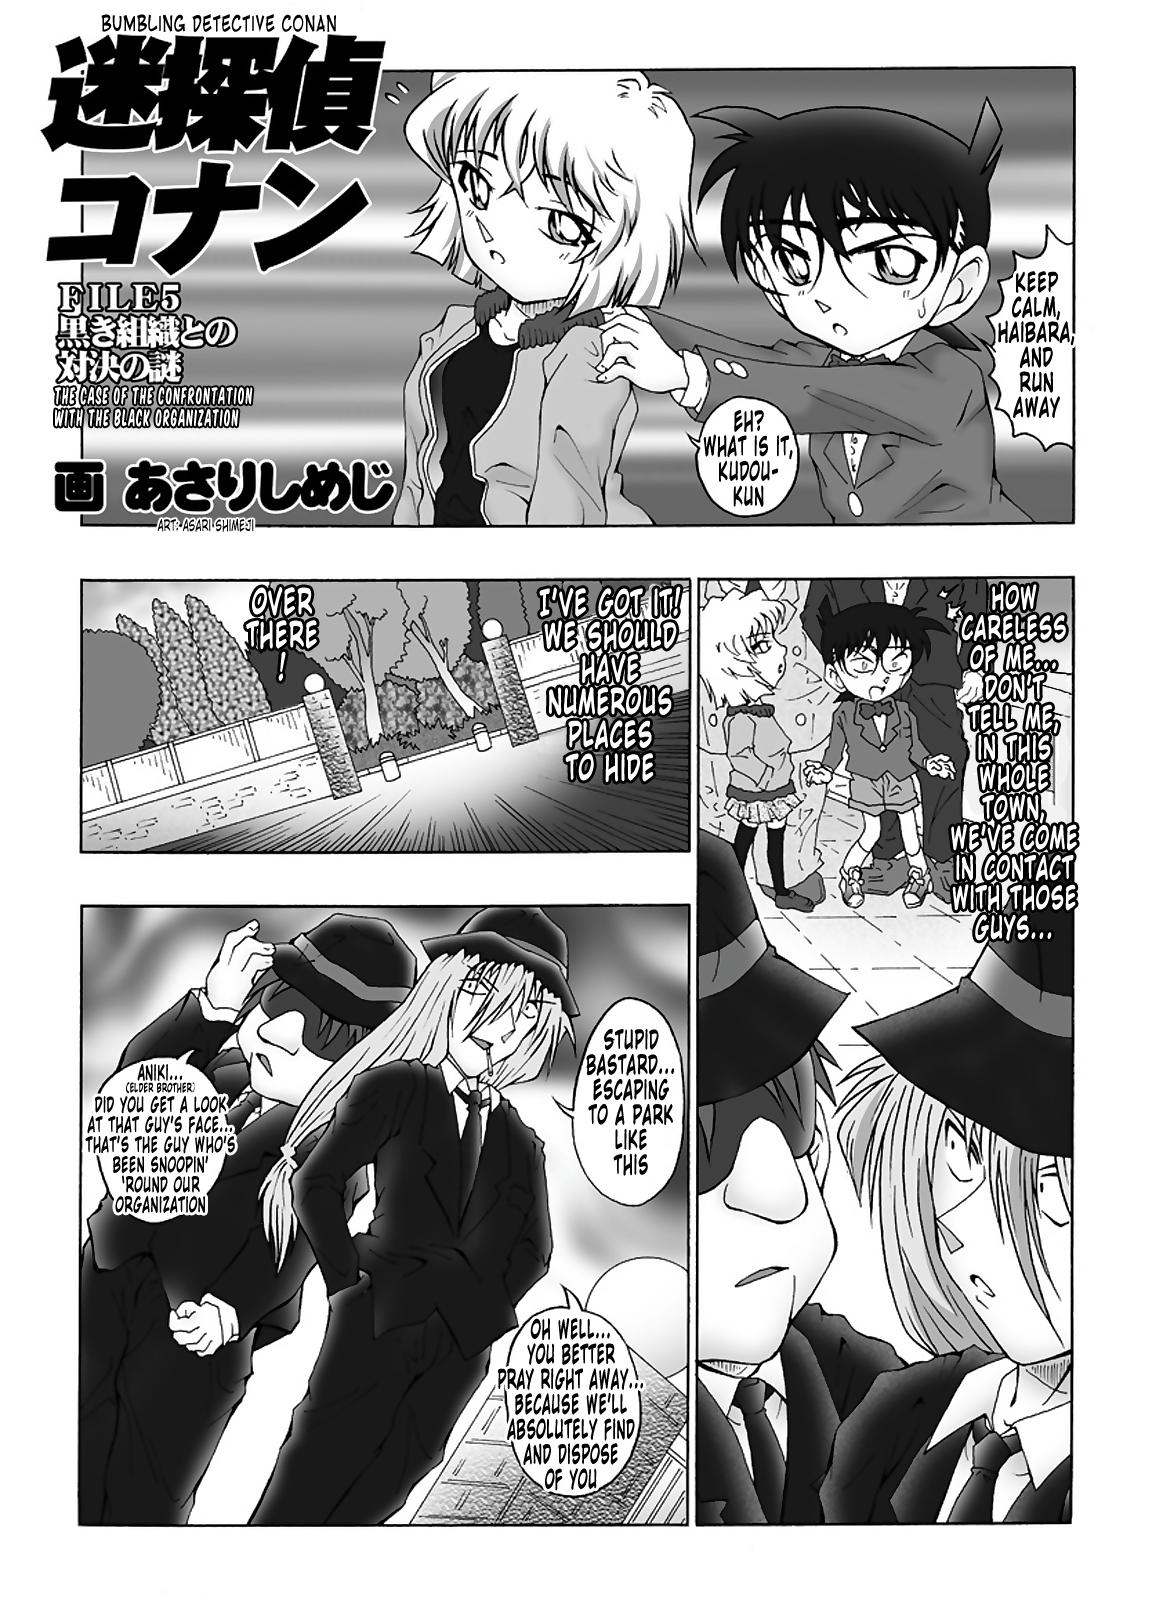 Pussy Fuck Bumbling Detective Conan - File 5: The Case of The Confrontation with The Black Organiztion - Detective conan Ssbbw - Page 4